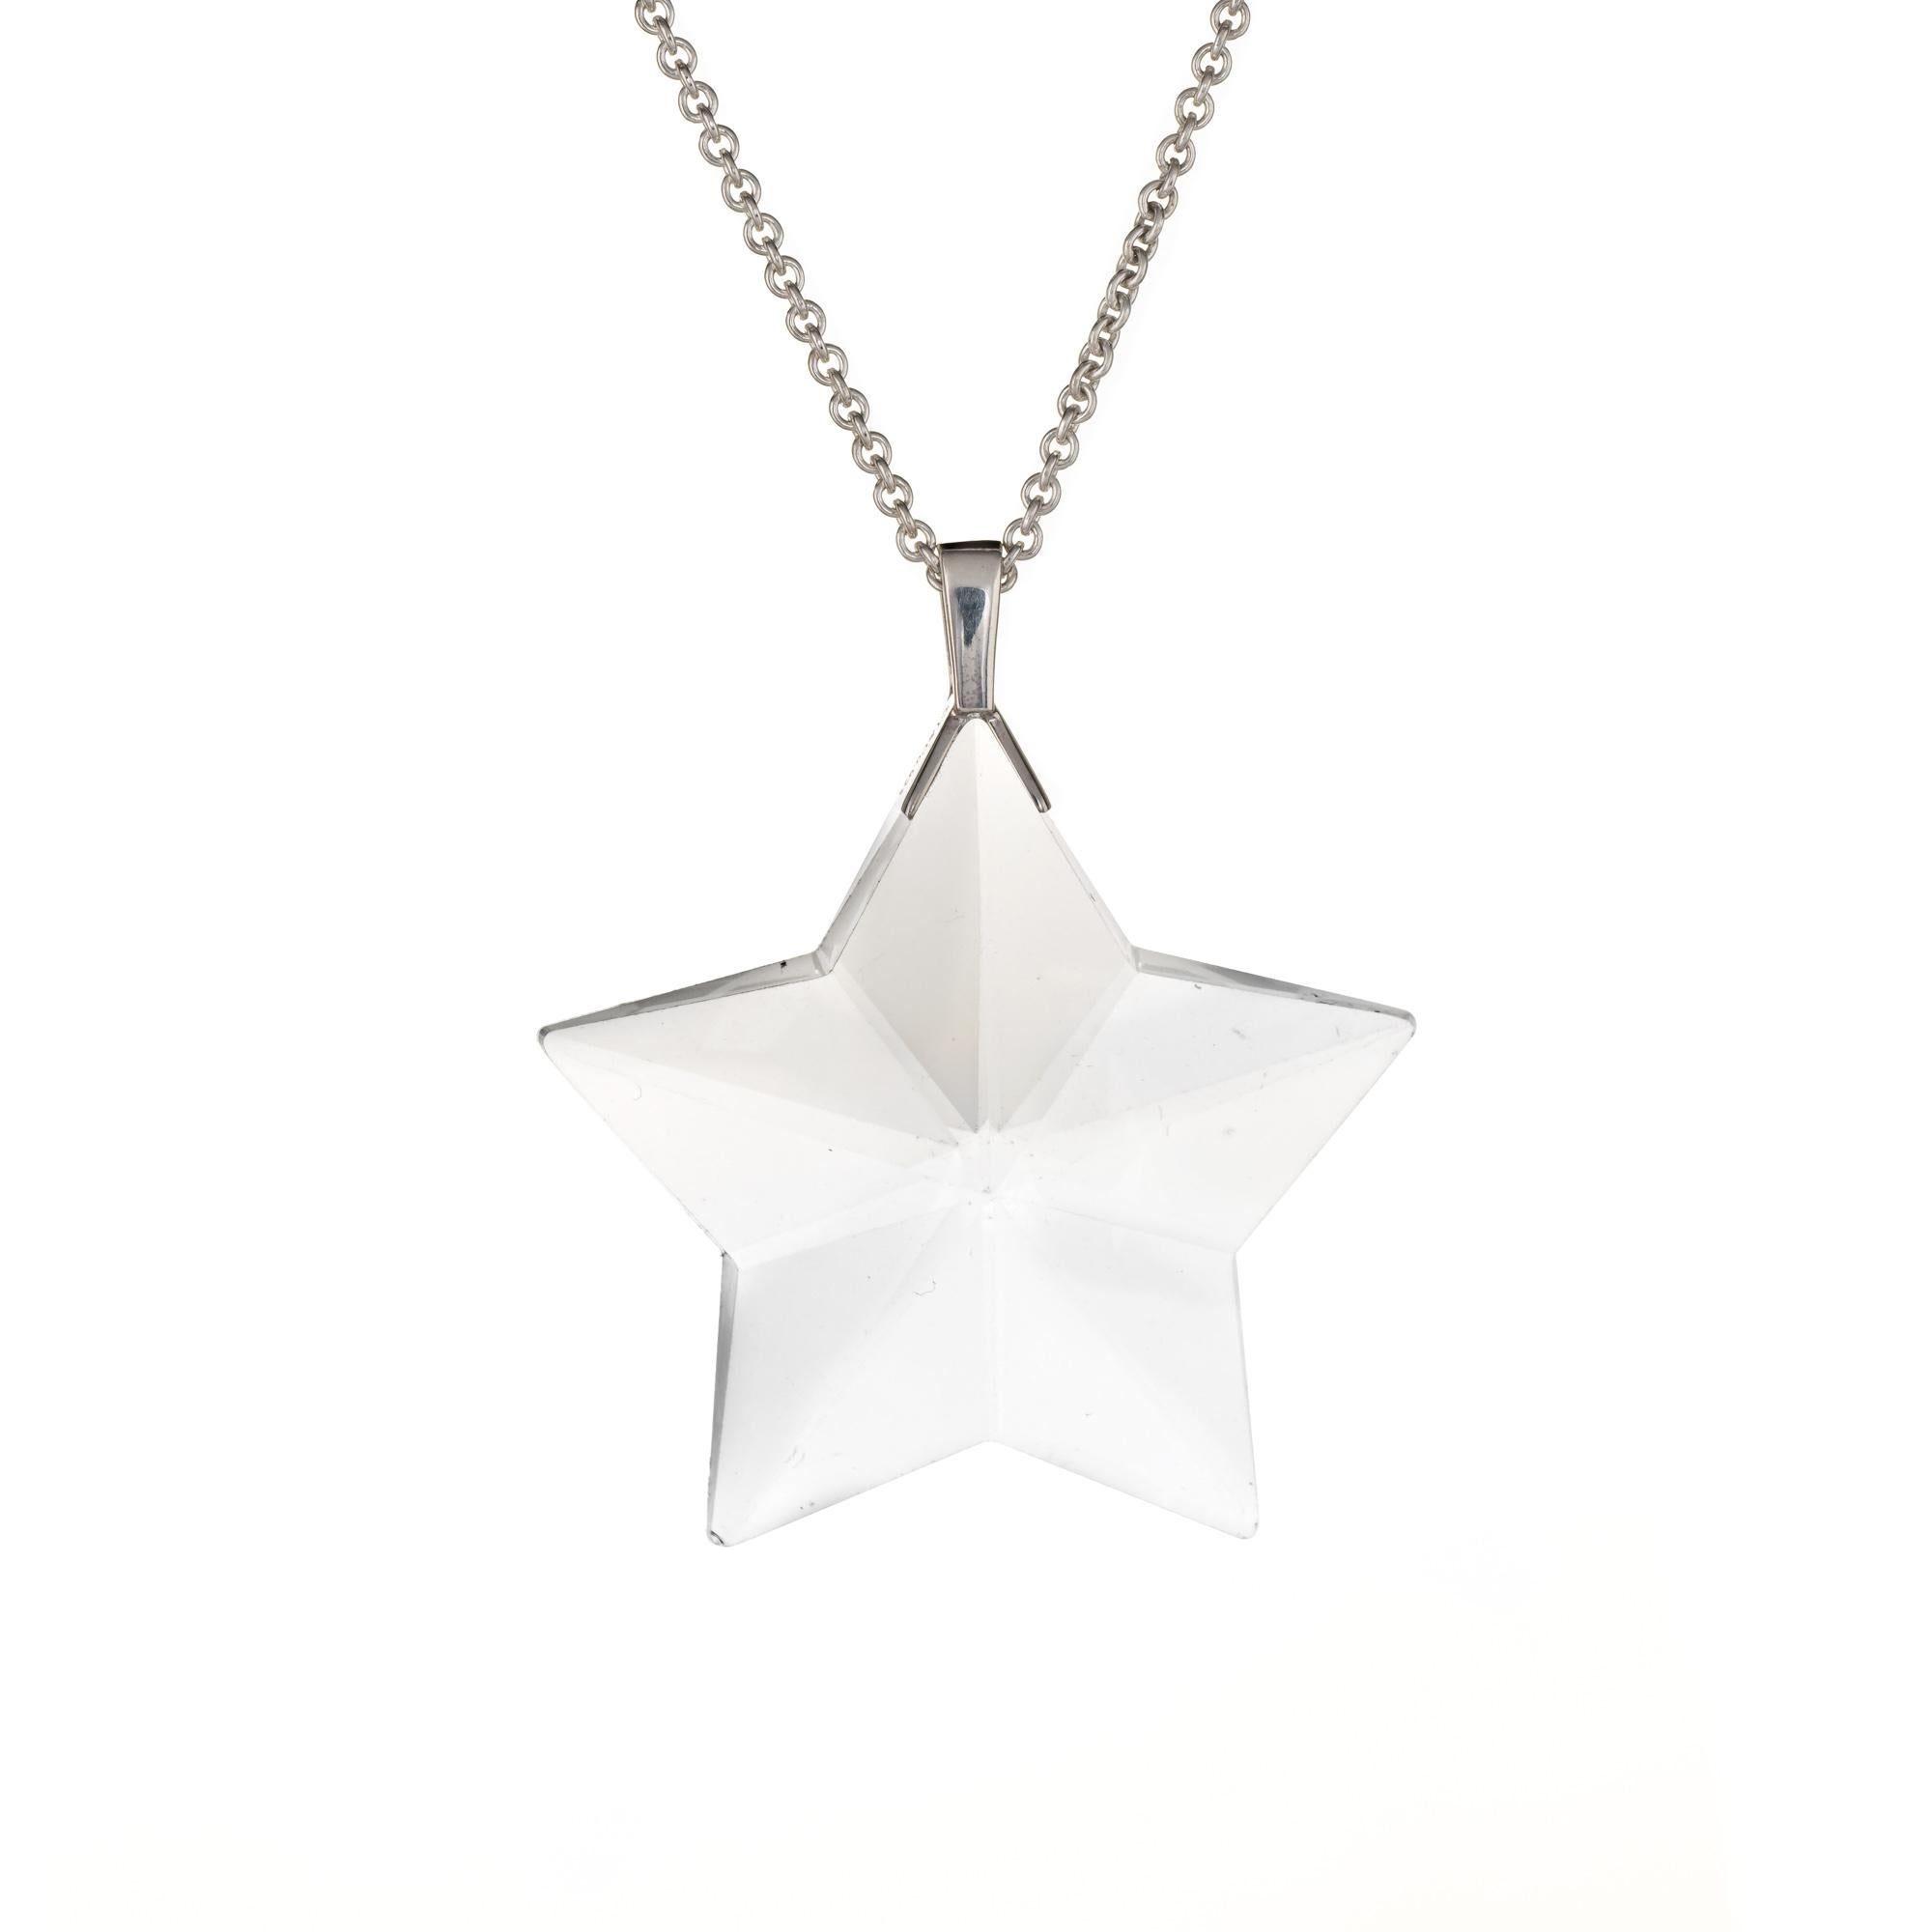 Finely detailed pre owned Tiffany & Co star crystal necklace crafted in sterling silver.  

The large crystal star measures 35mm diameter (1.37 inches). The stone is in excellent condition and free of cracks or chips. 

The necklace is a retired